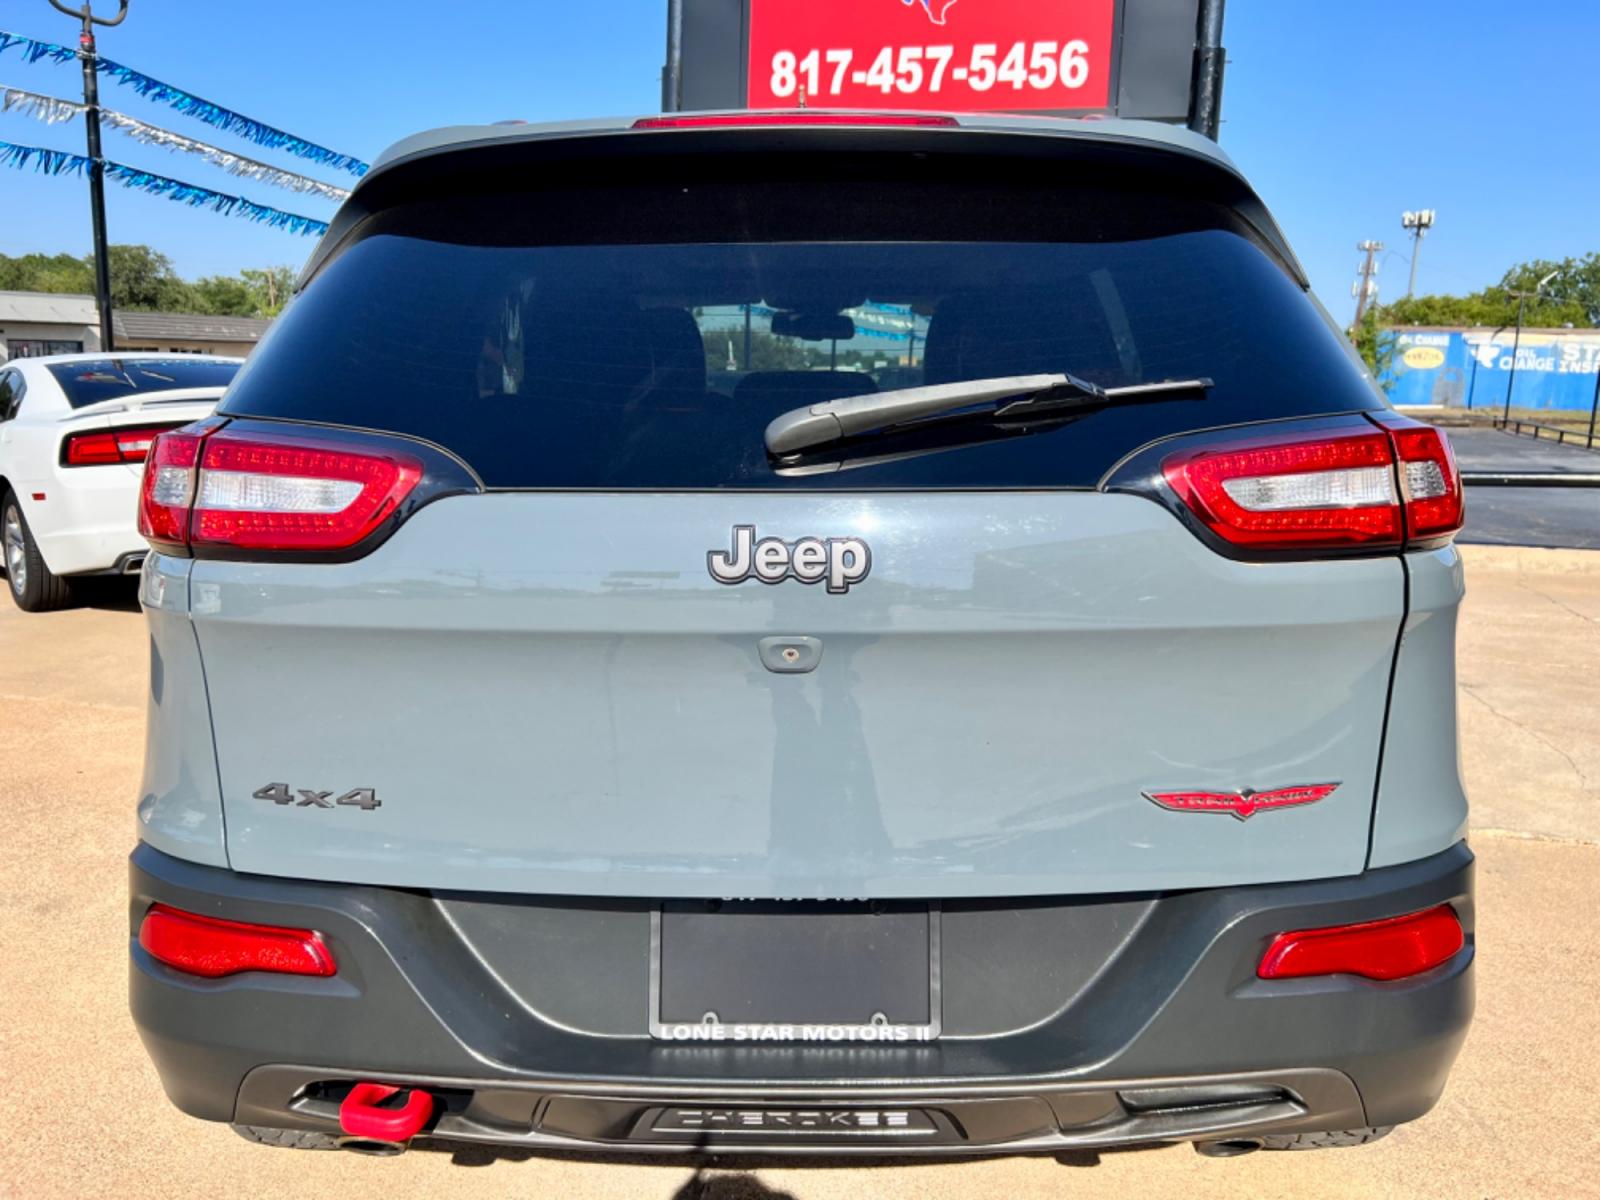 2014 GRAY JEEP CHEROKEE (1C4PJMBS1EW) , located at 5900 E. Lancaster Ave., Fort Worth, TX, 76112, (817) 457-5456, 0.000000, 0.000000 - This is a 2014 JEEP CHEROKEE 4 DOOR SUV that is in excellent condition. There are no dents or scratches. The interior is clean with no rips or tears or stains. All power windows, door locks and seats. Ice cold AC for those hot Texas summer days. It is equipped with a CD player, AM/FM radio, AUX port - Photo #5